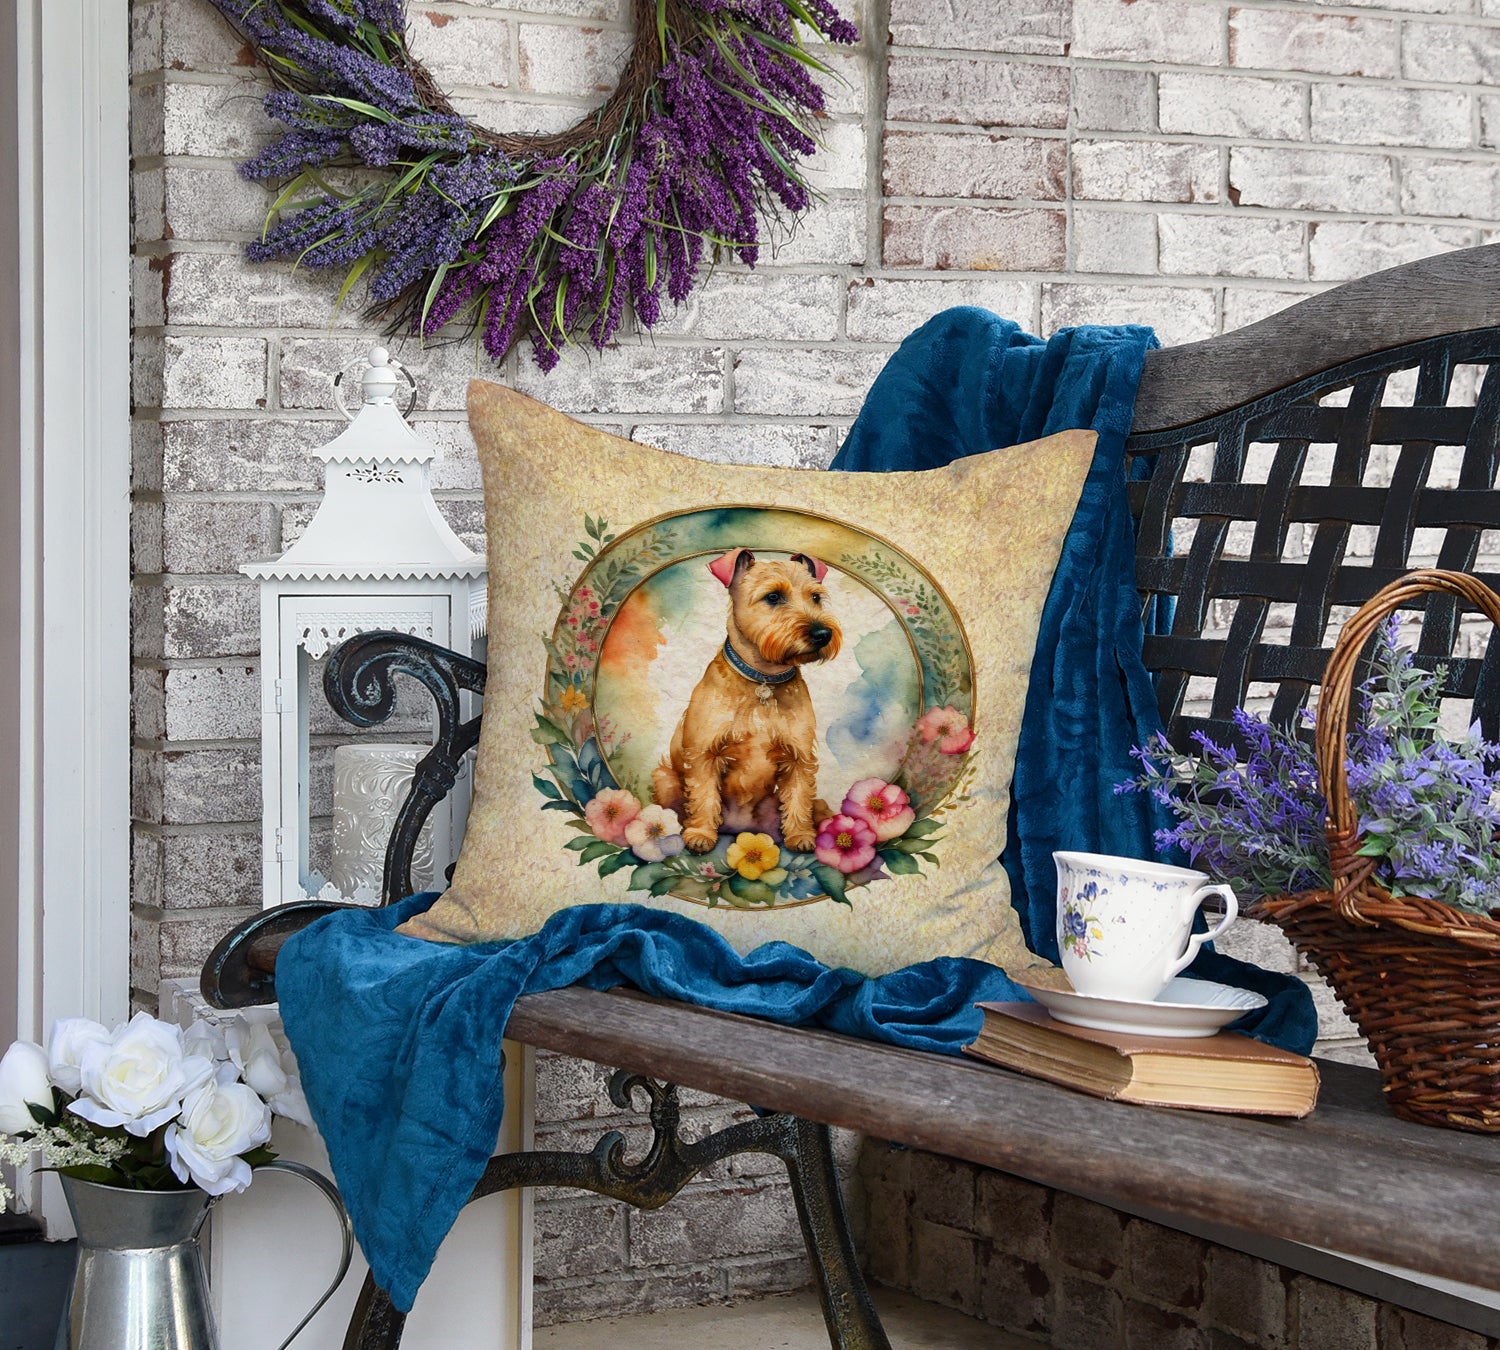 Lakeland Terrier and Flowers Fabric Decorative Pillow